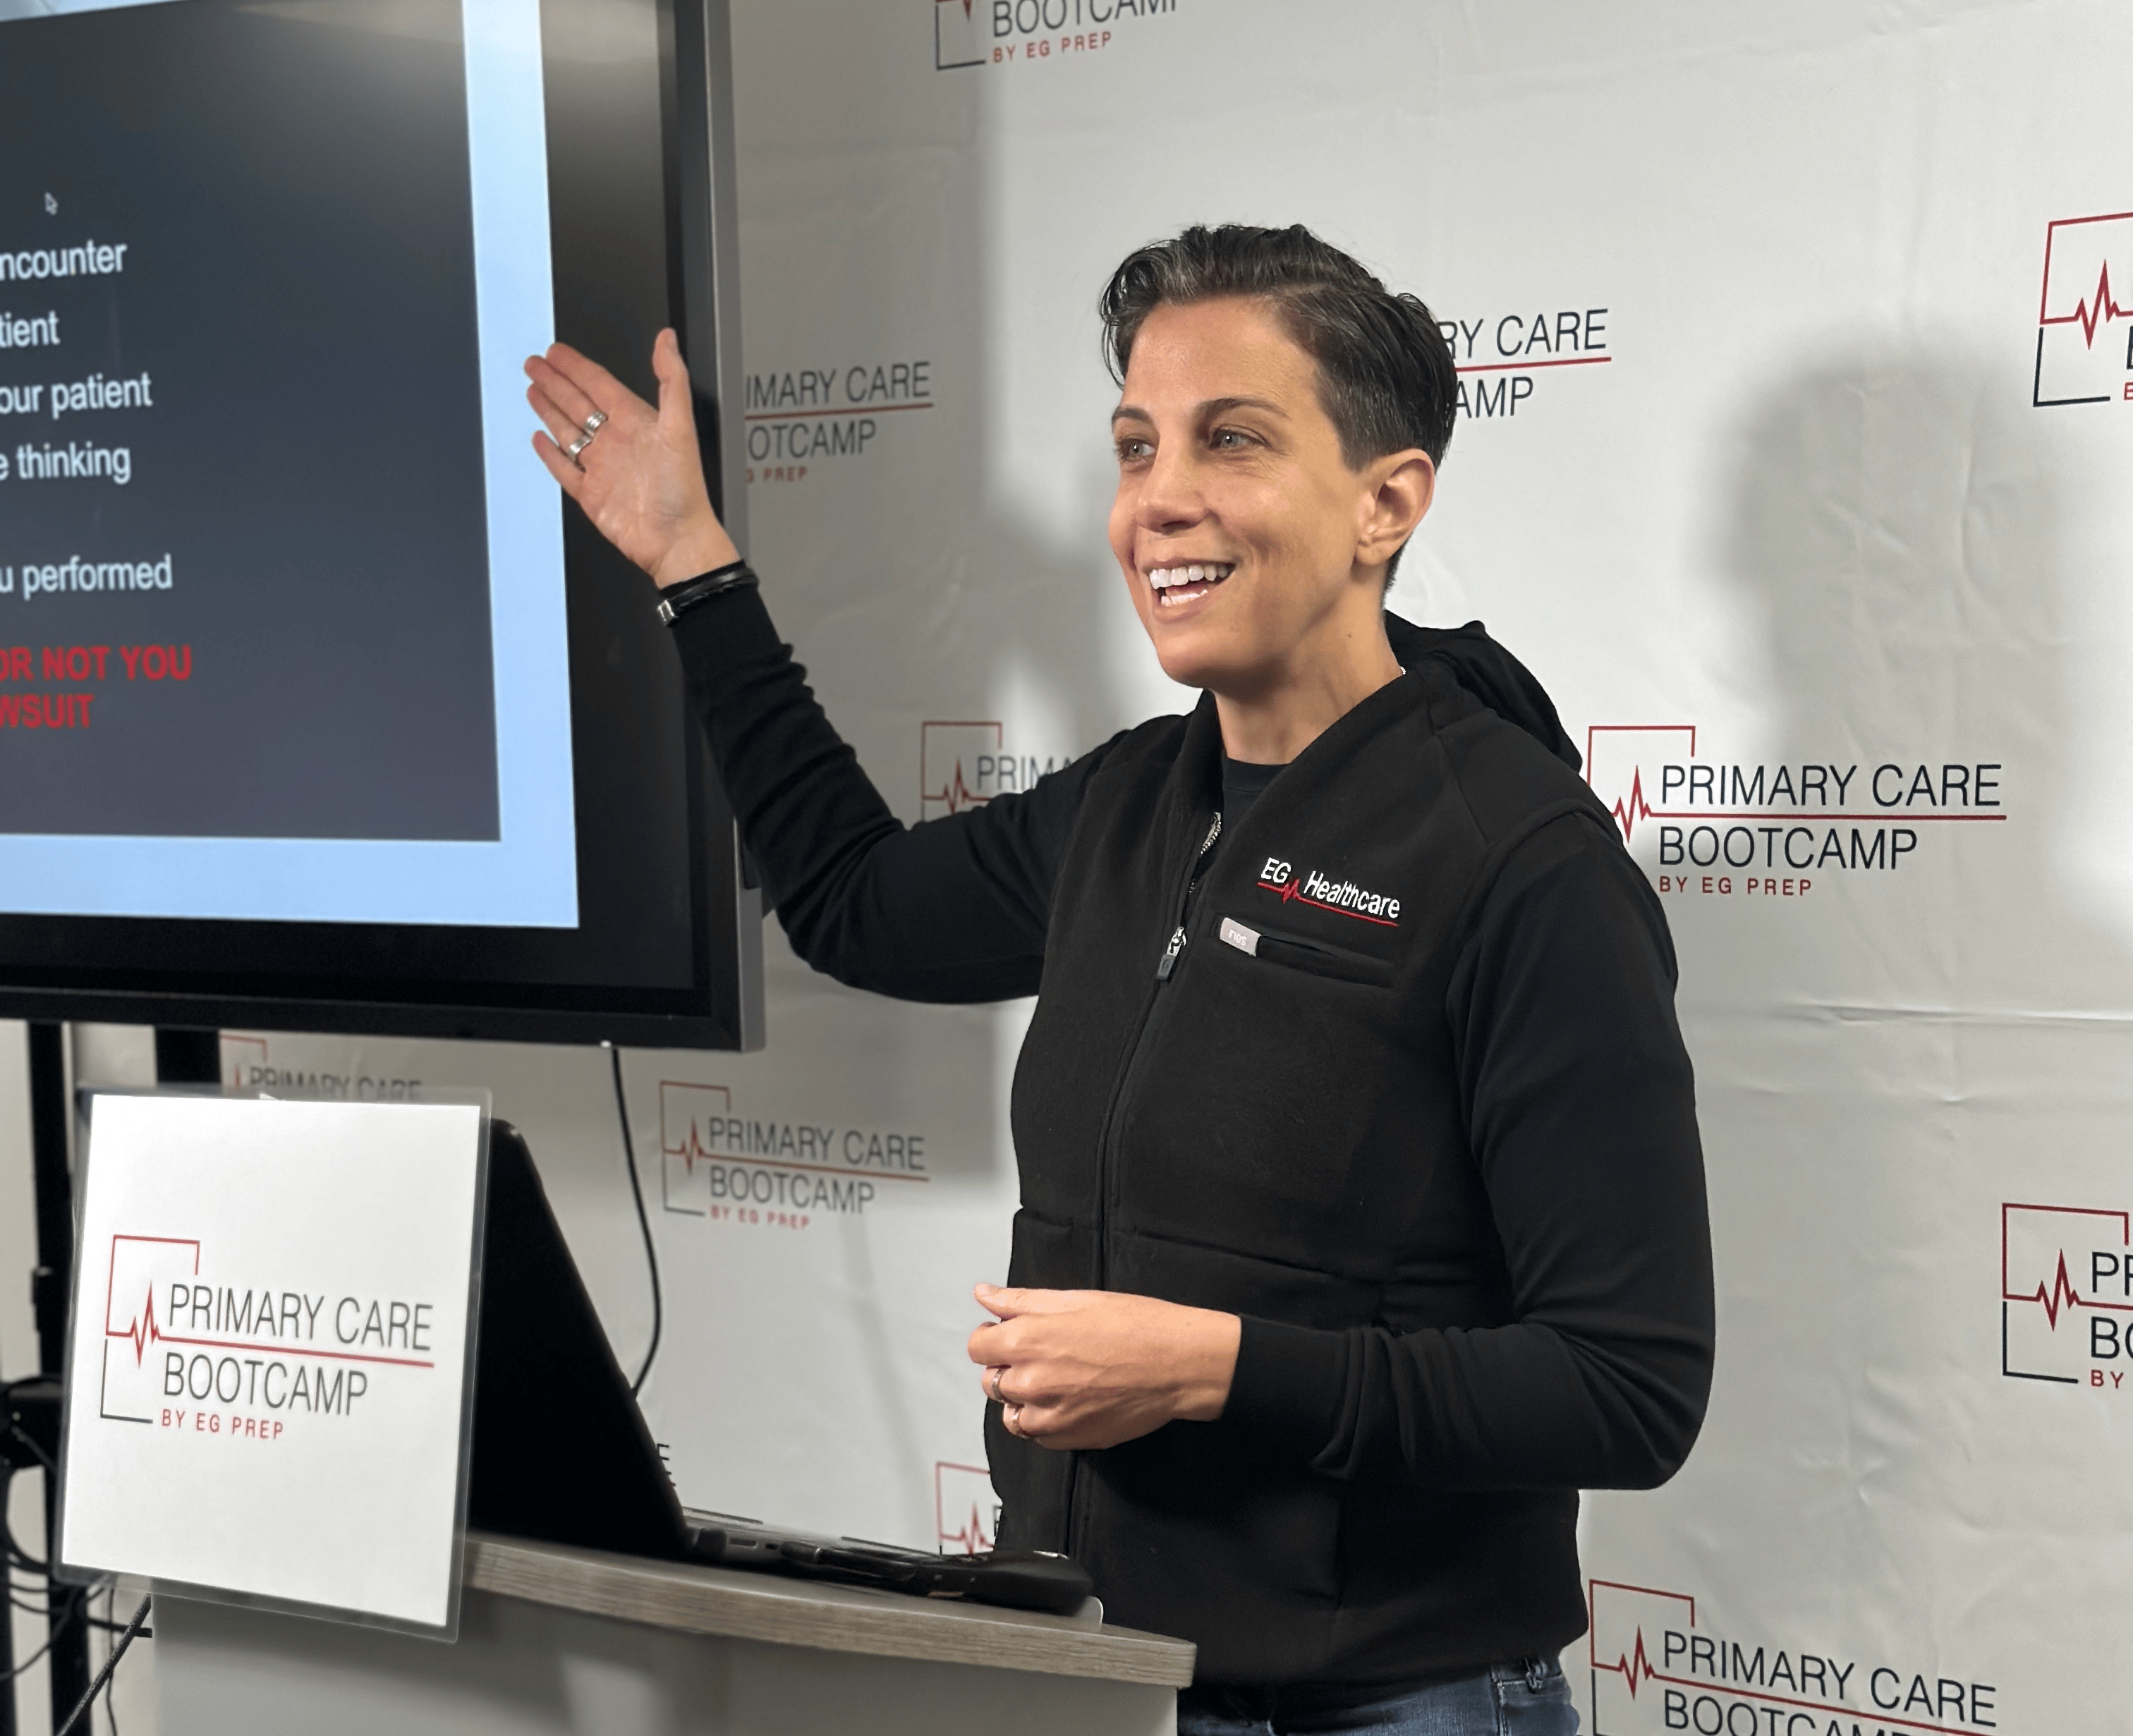 A woman giving a presentation on how to get started with SEO in front of a screen.